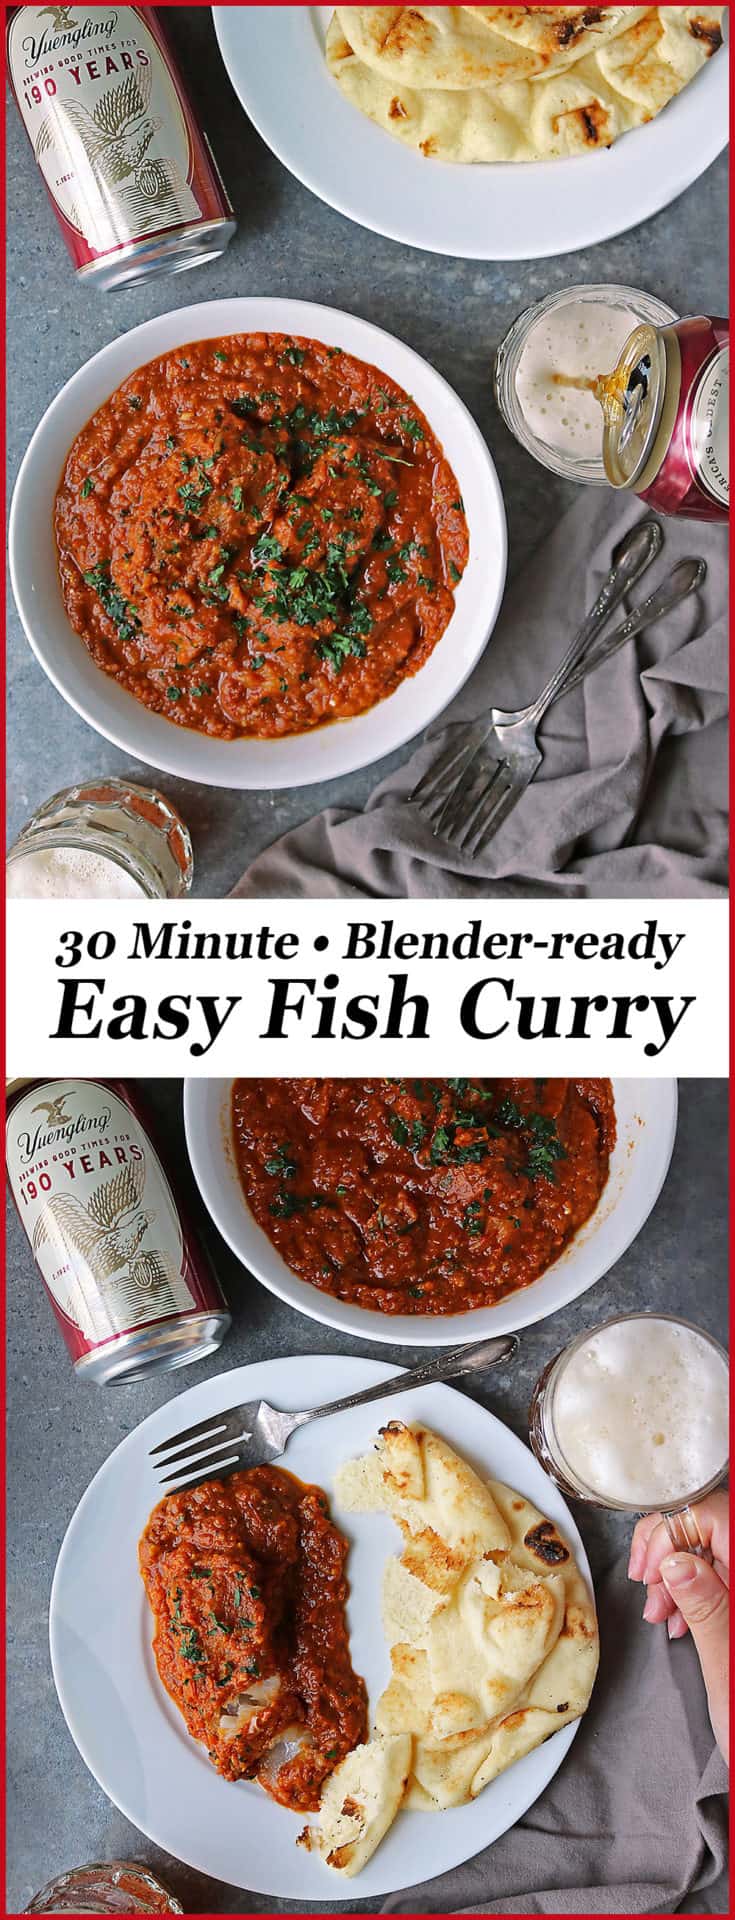 30 Minute Fish Curry Recipe - Savory Spin